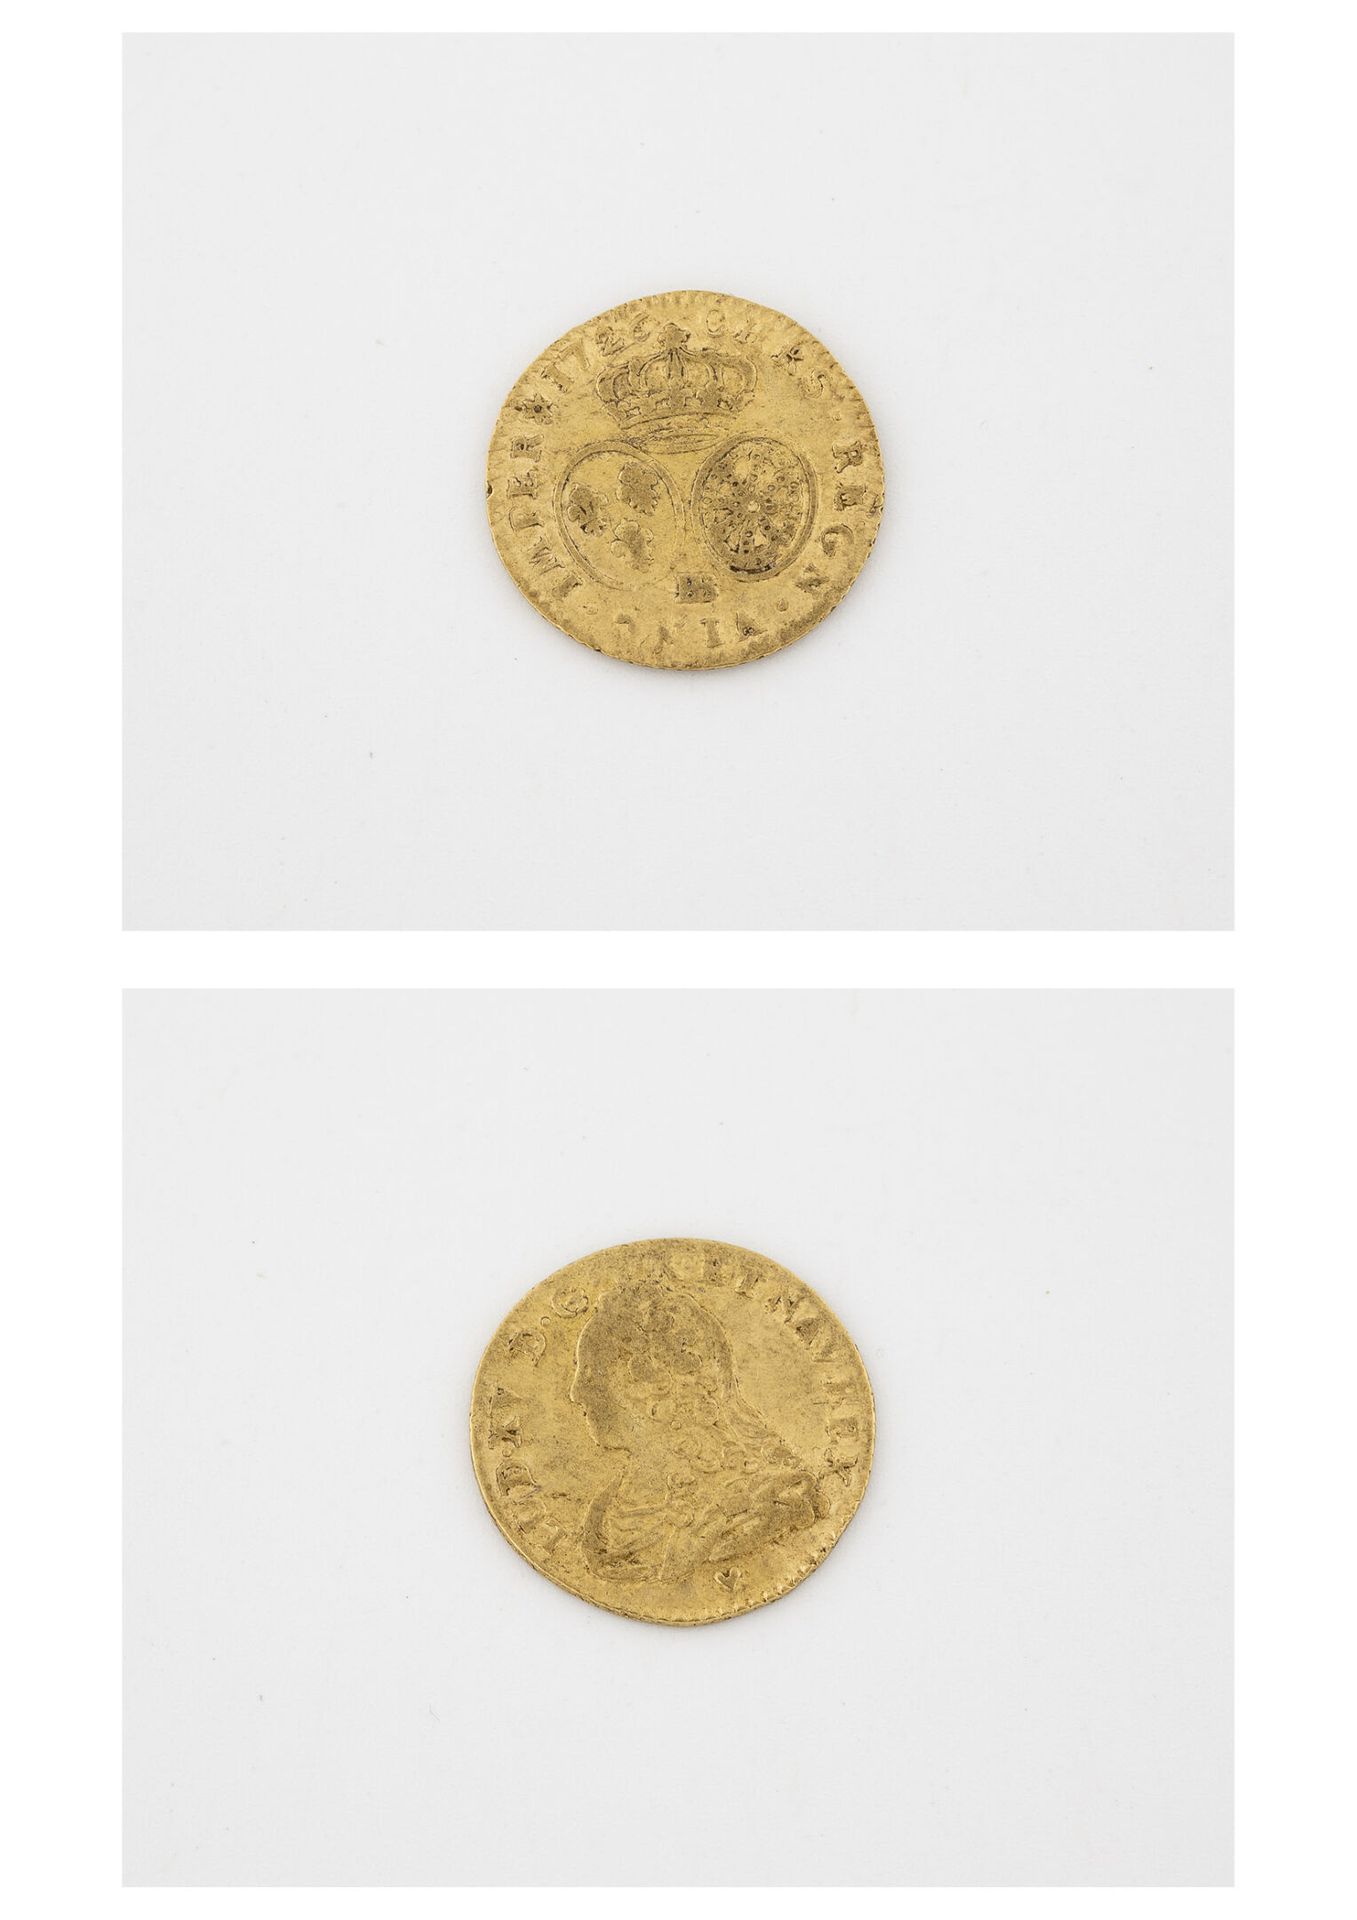 France LOUIS XV (1715 - 1774)

Half-louis of gold. 1726 BB (Strasbourg). Front :&hellip;